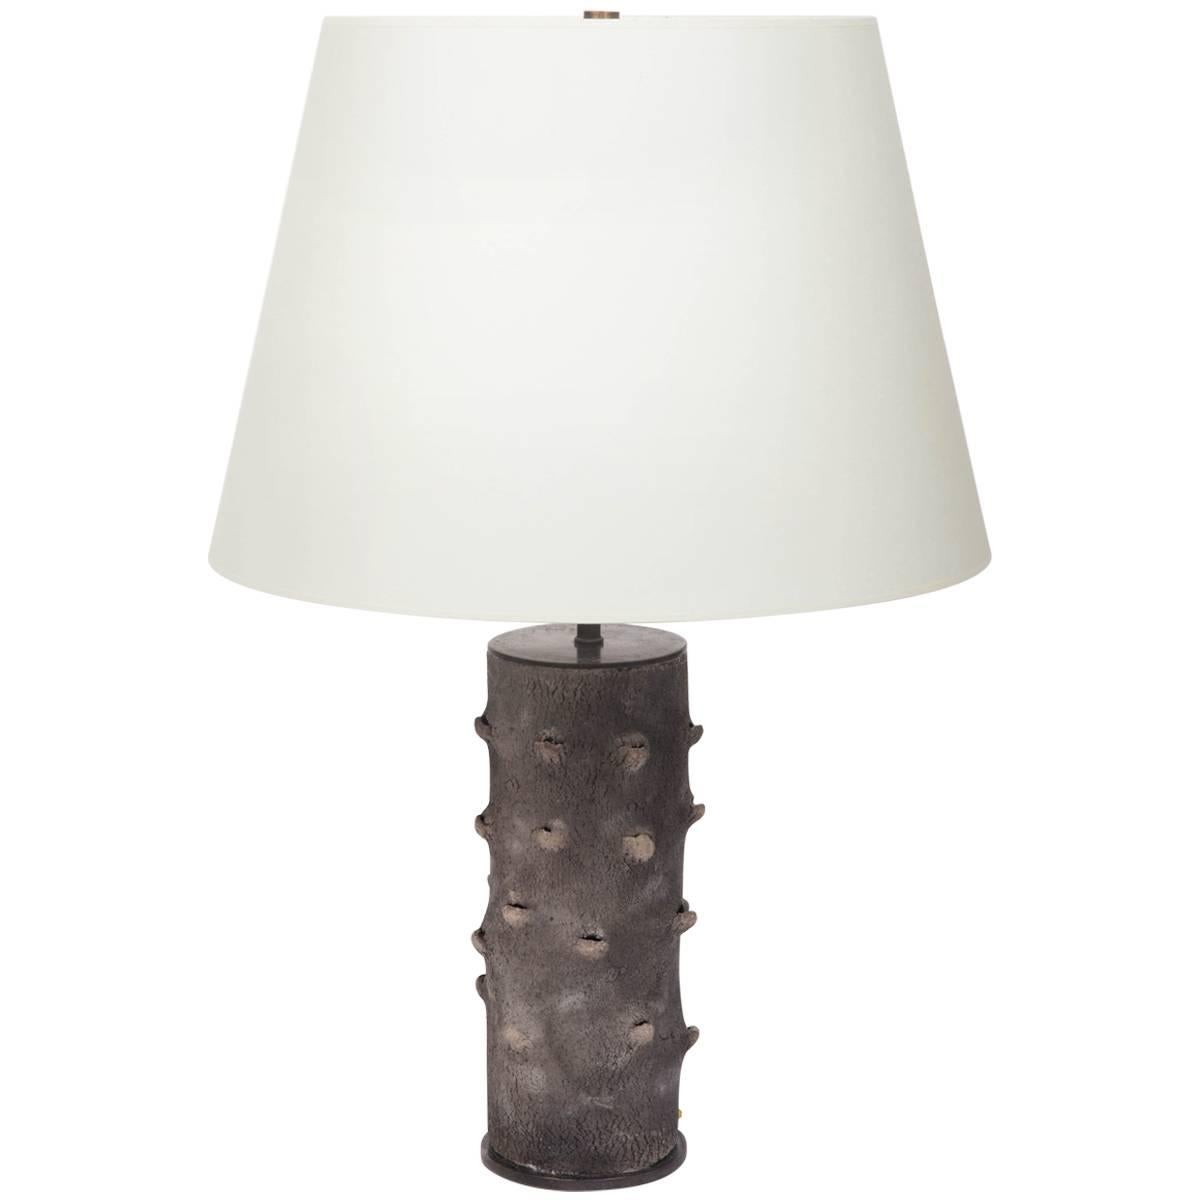 Matte Grey Table Lamp with Bark-Like Texture